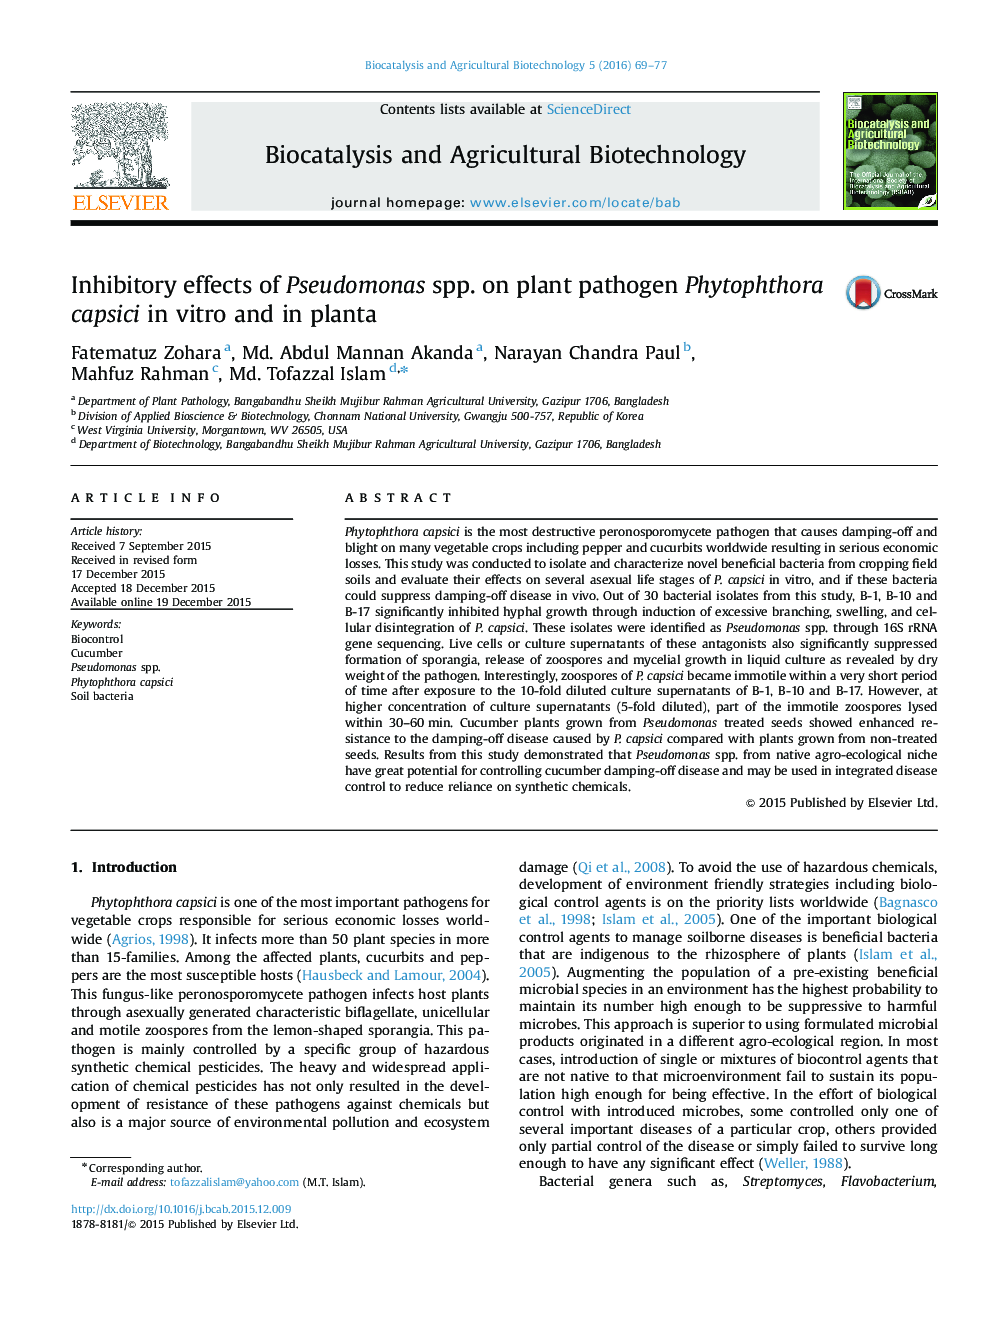 Inhibitory effects of Pseudomonas spp. on plant pathogen Phytophthora capsici in vitro and in planta